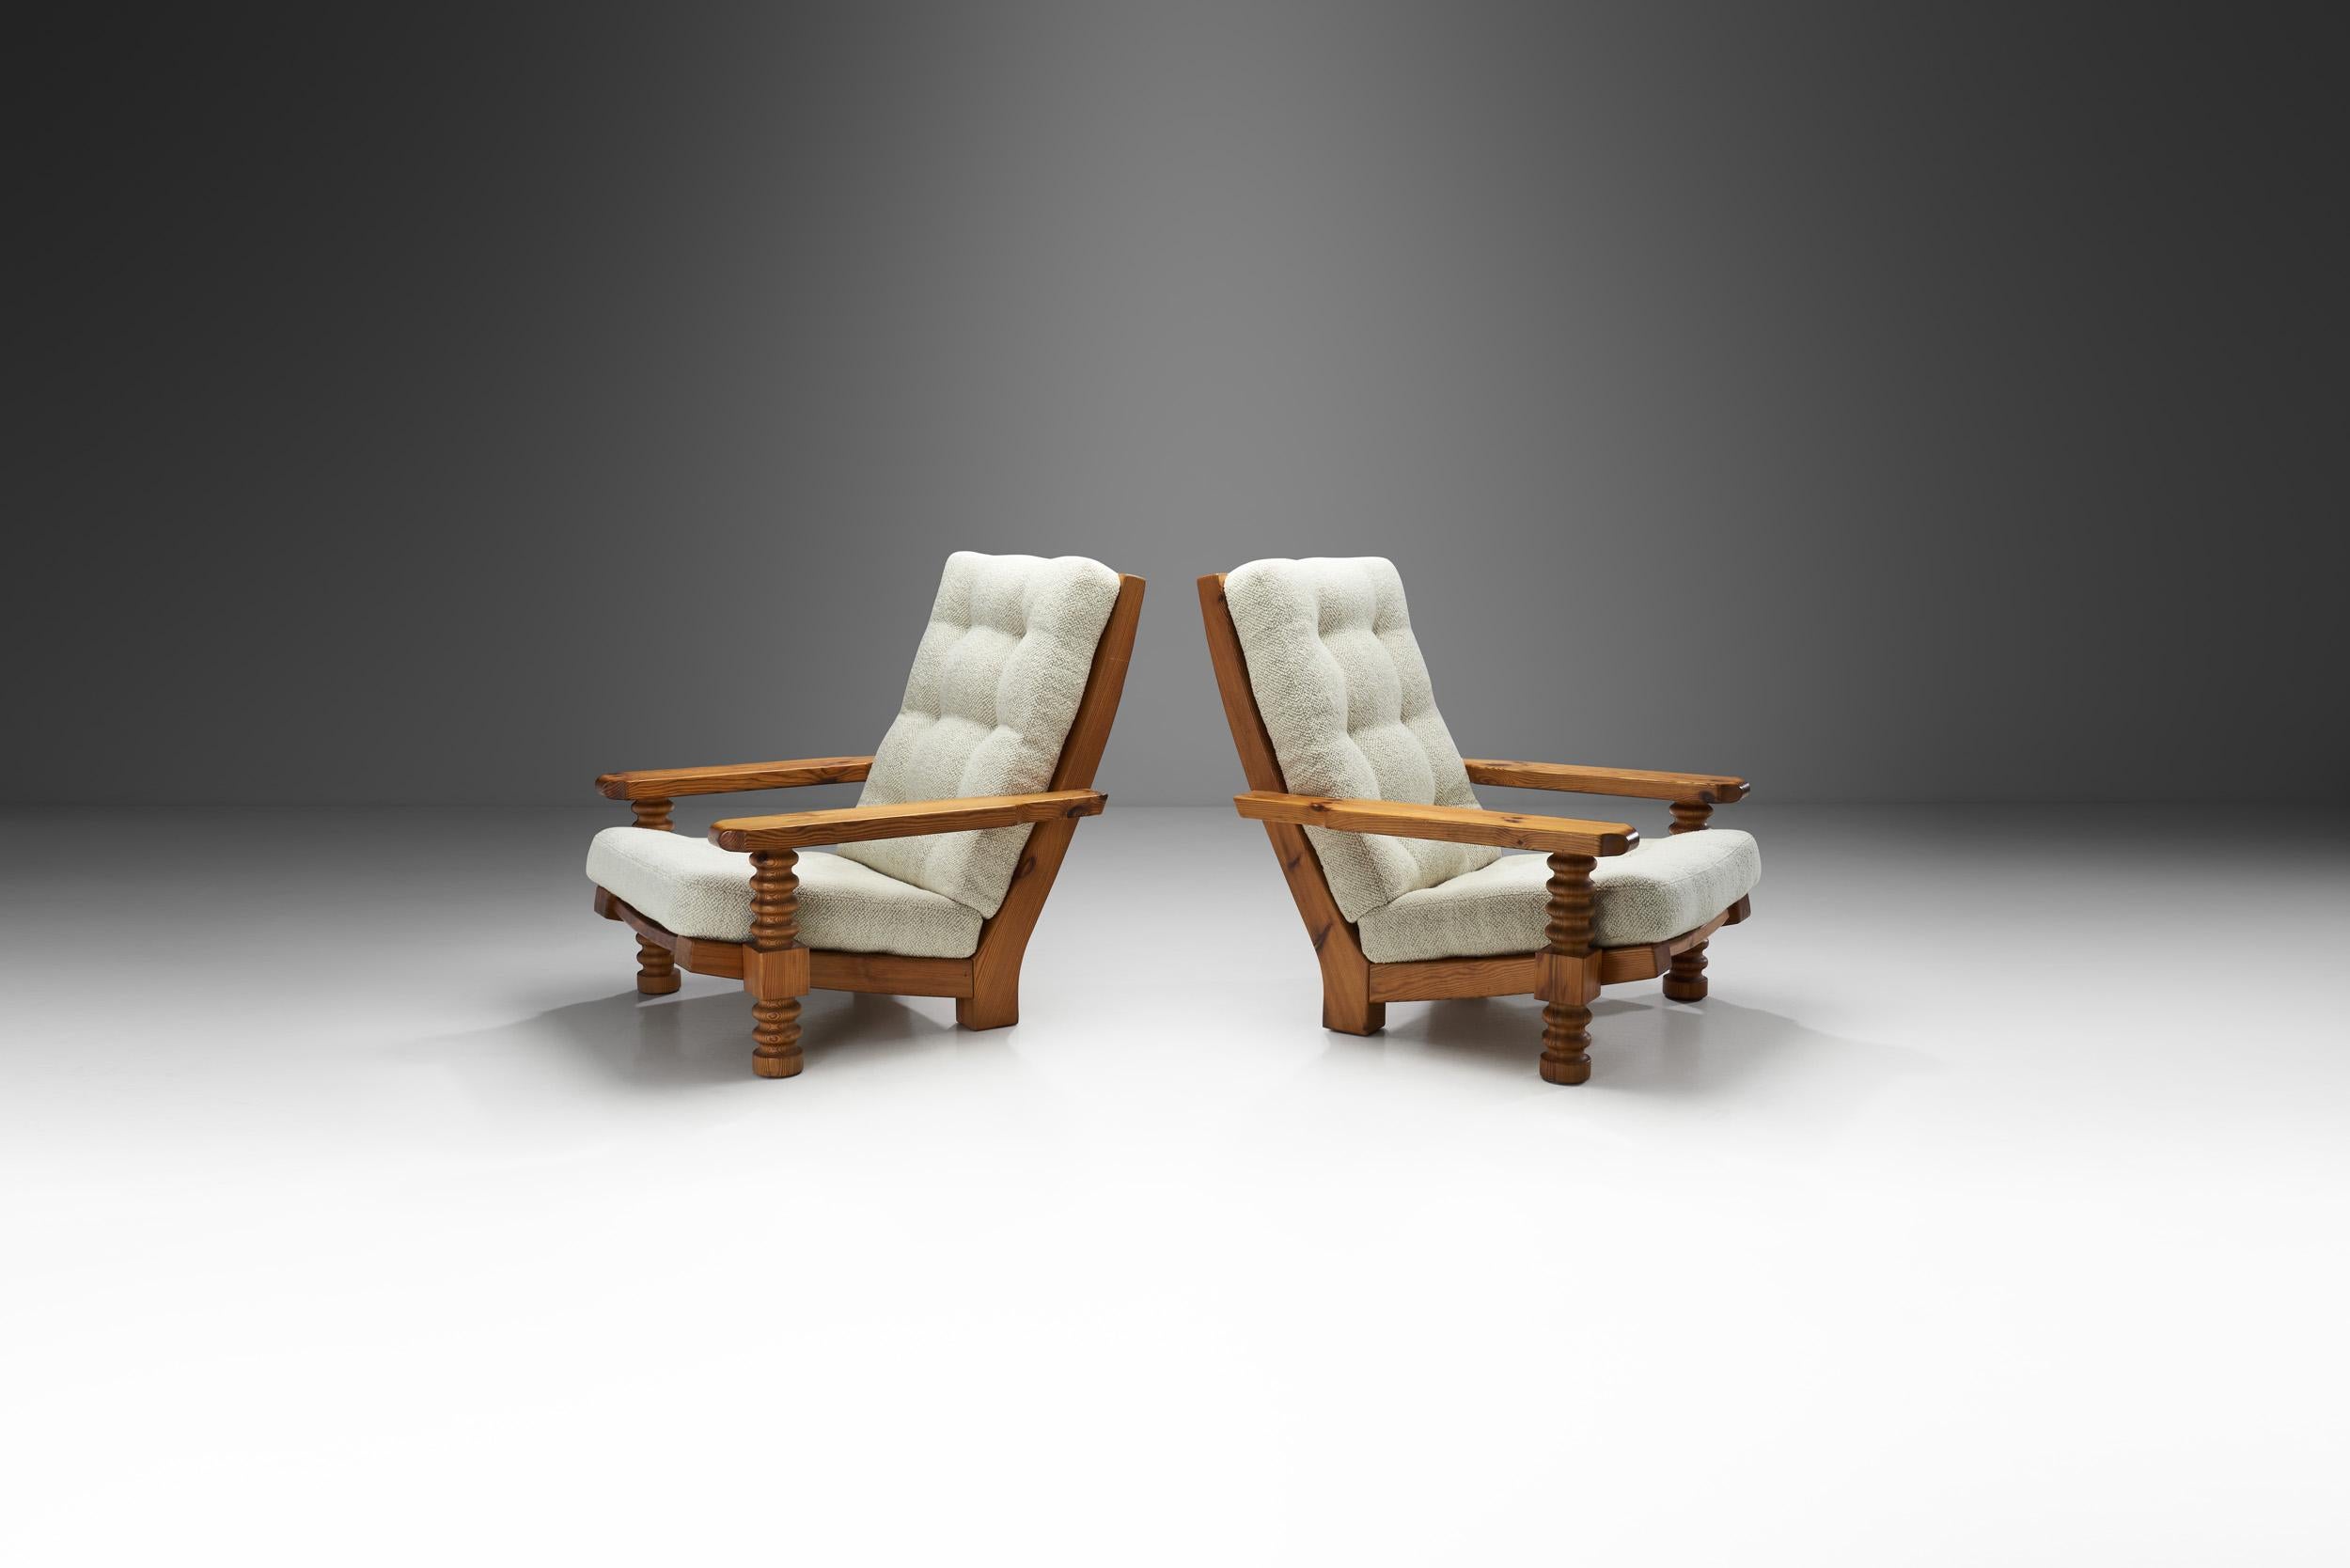 Mid-20th Century Swedish Pine Armchairs with Sculpted Legs, Sweden, 1960s For Sale